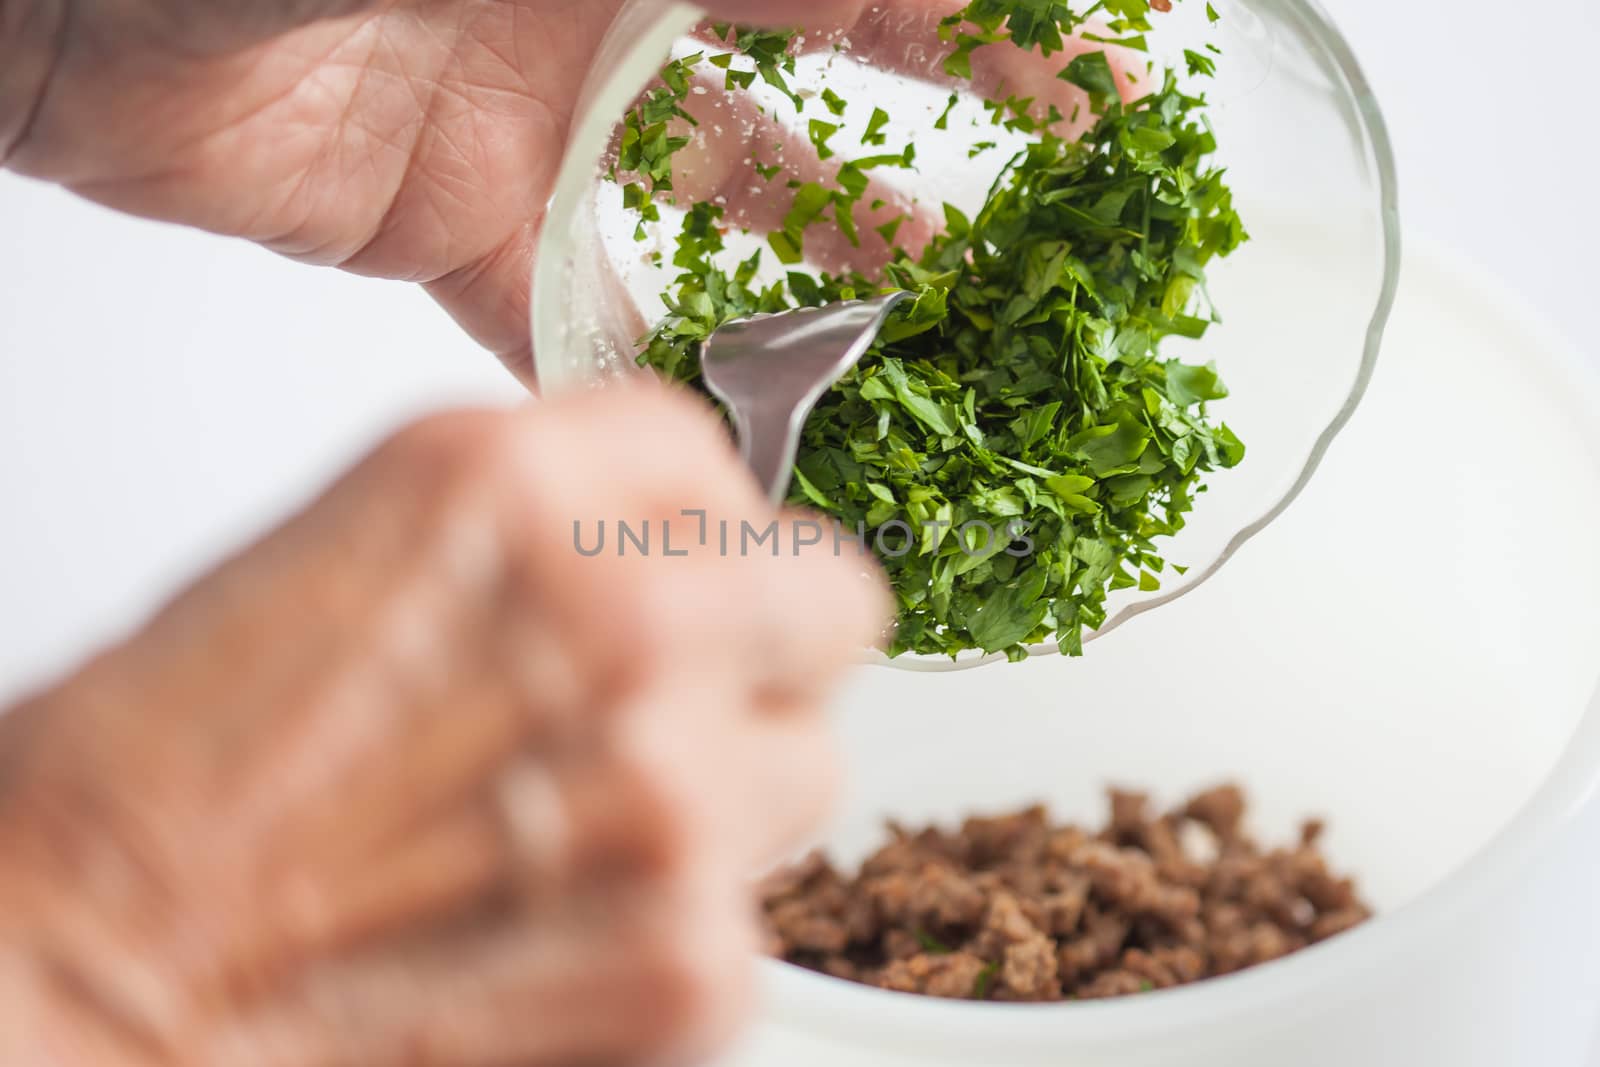 Step by step Levantine cuisine kibbeh preparation : Mixing the ingredients to prepare kibbeh filling into a bowl